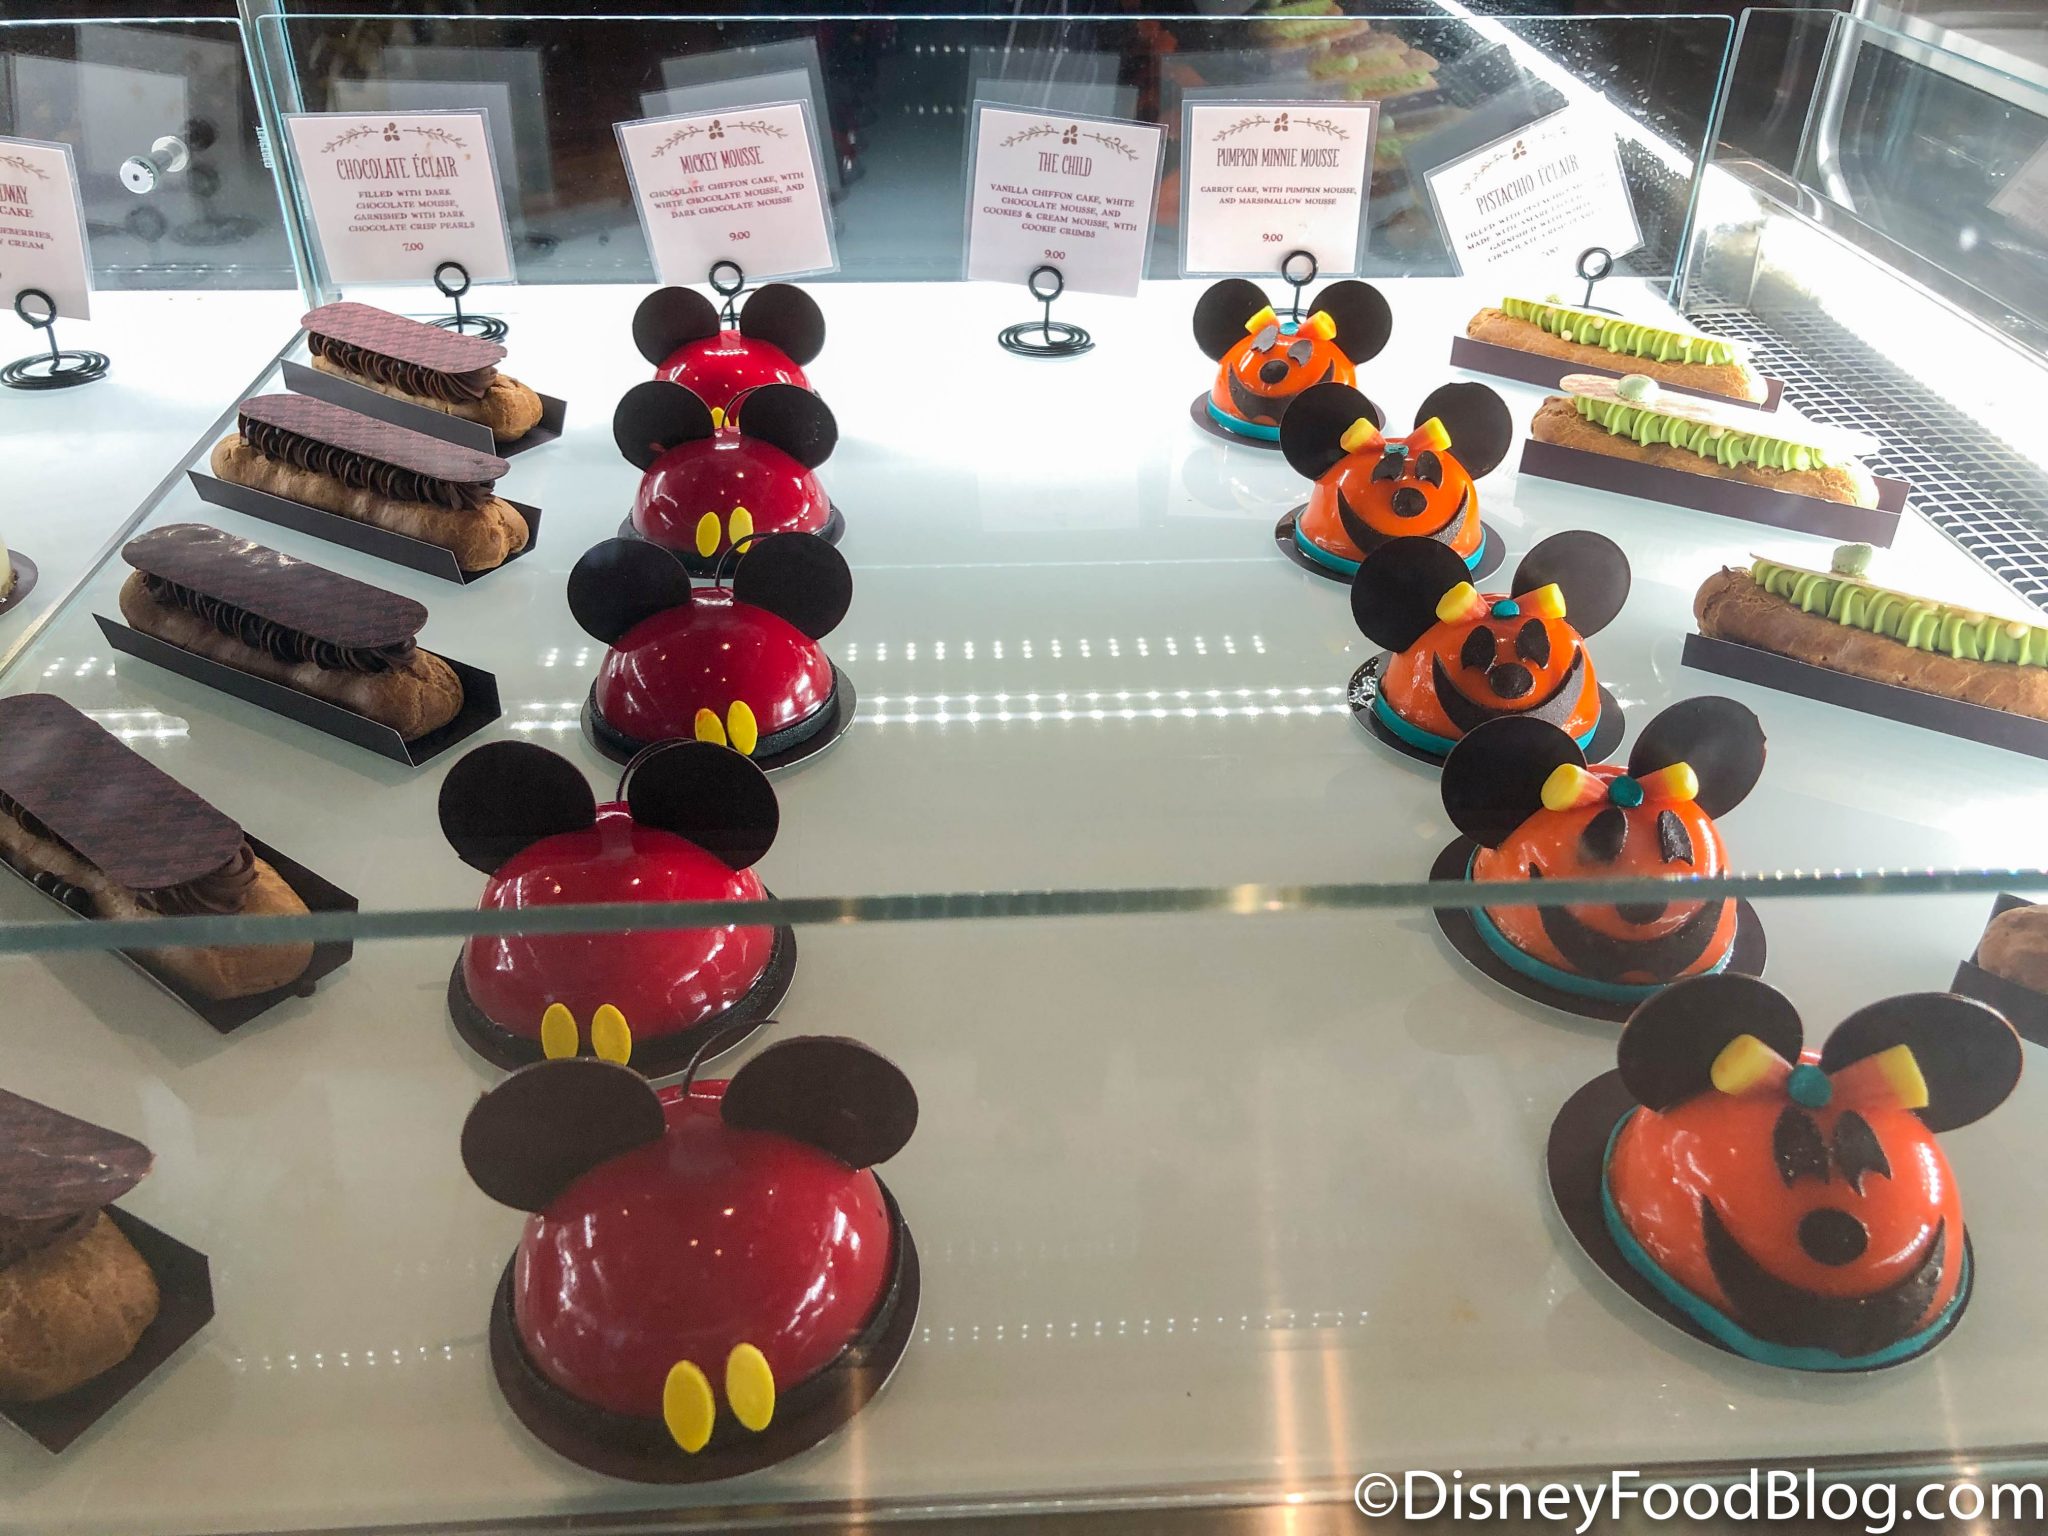 Review! The Mickey Dome Cake Gets a NEW Festive Look in Disney World ...